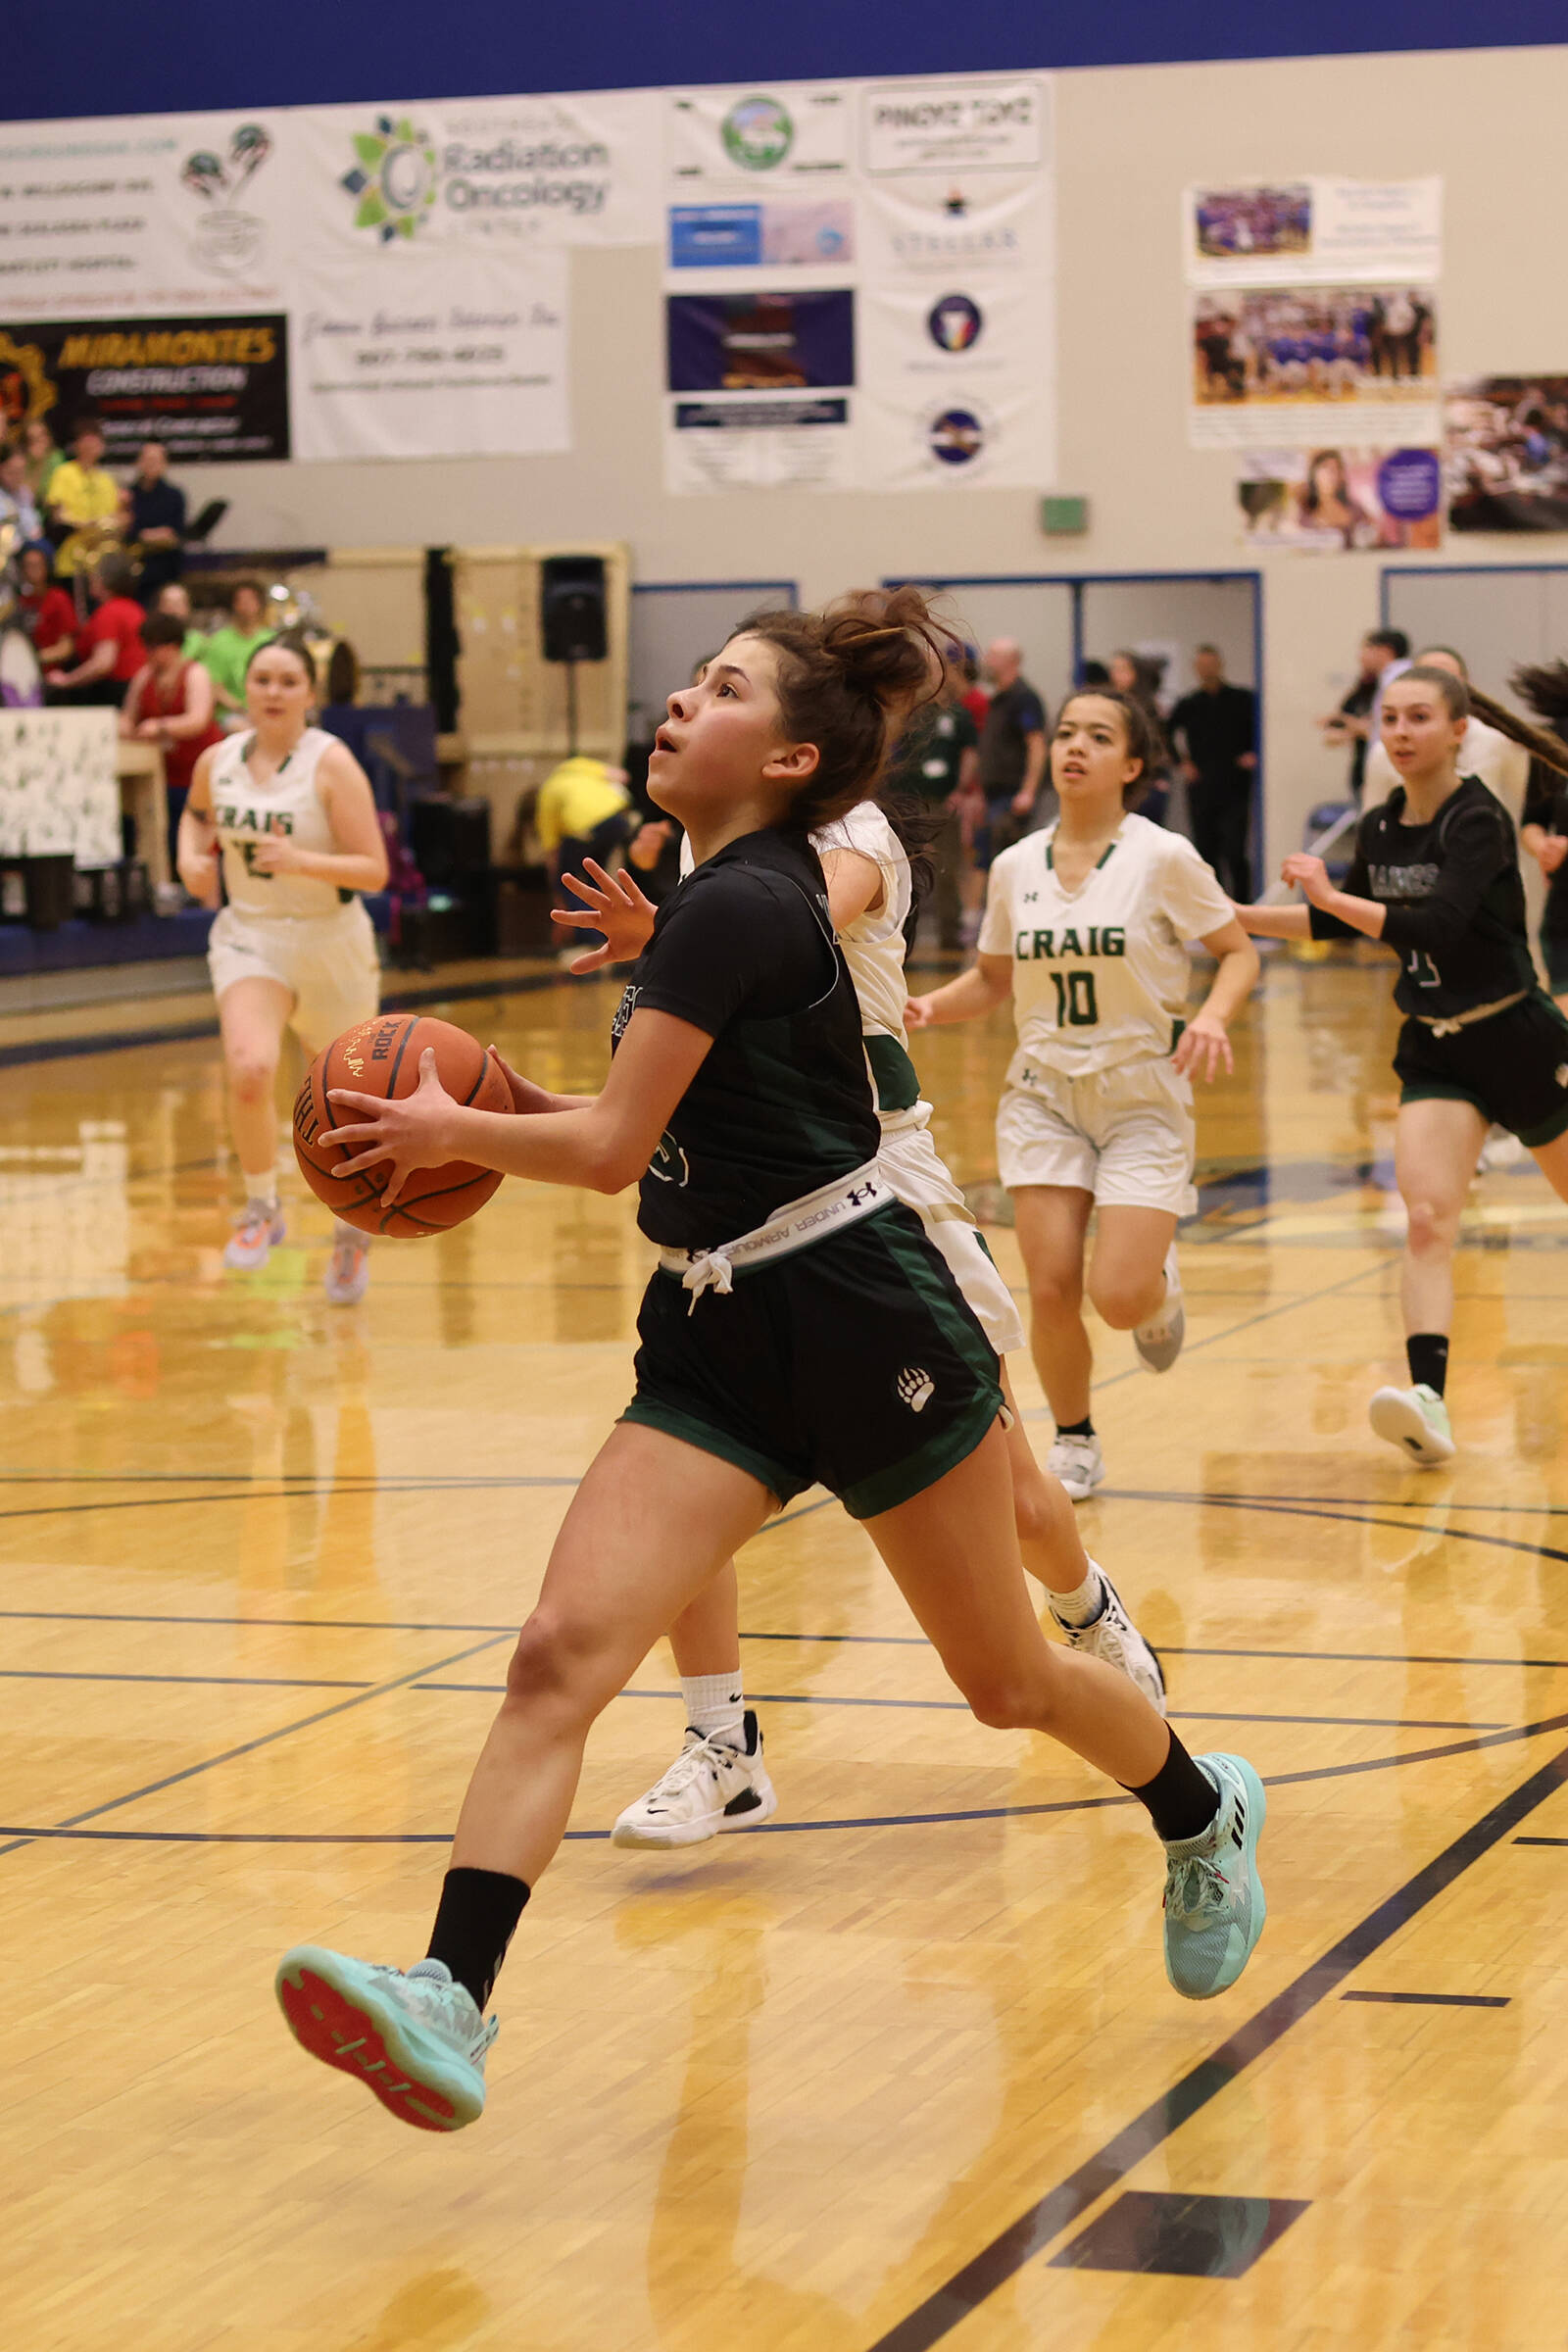 Haines sophomore Ari’el Godinez Long (3) leads the pack down the court on her way to putting 2 points on the board in a game against Craig that secured the Lady Glacier Bears a trip to state. (Ben Hohenstatt / Juneau Empire)